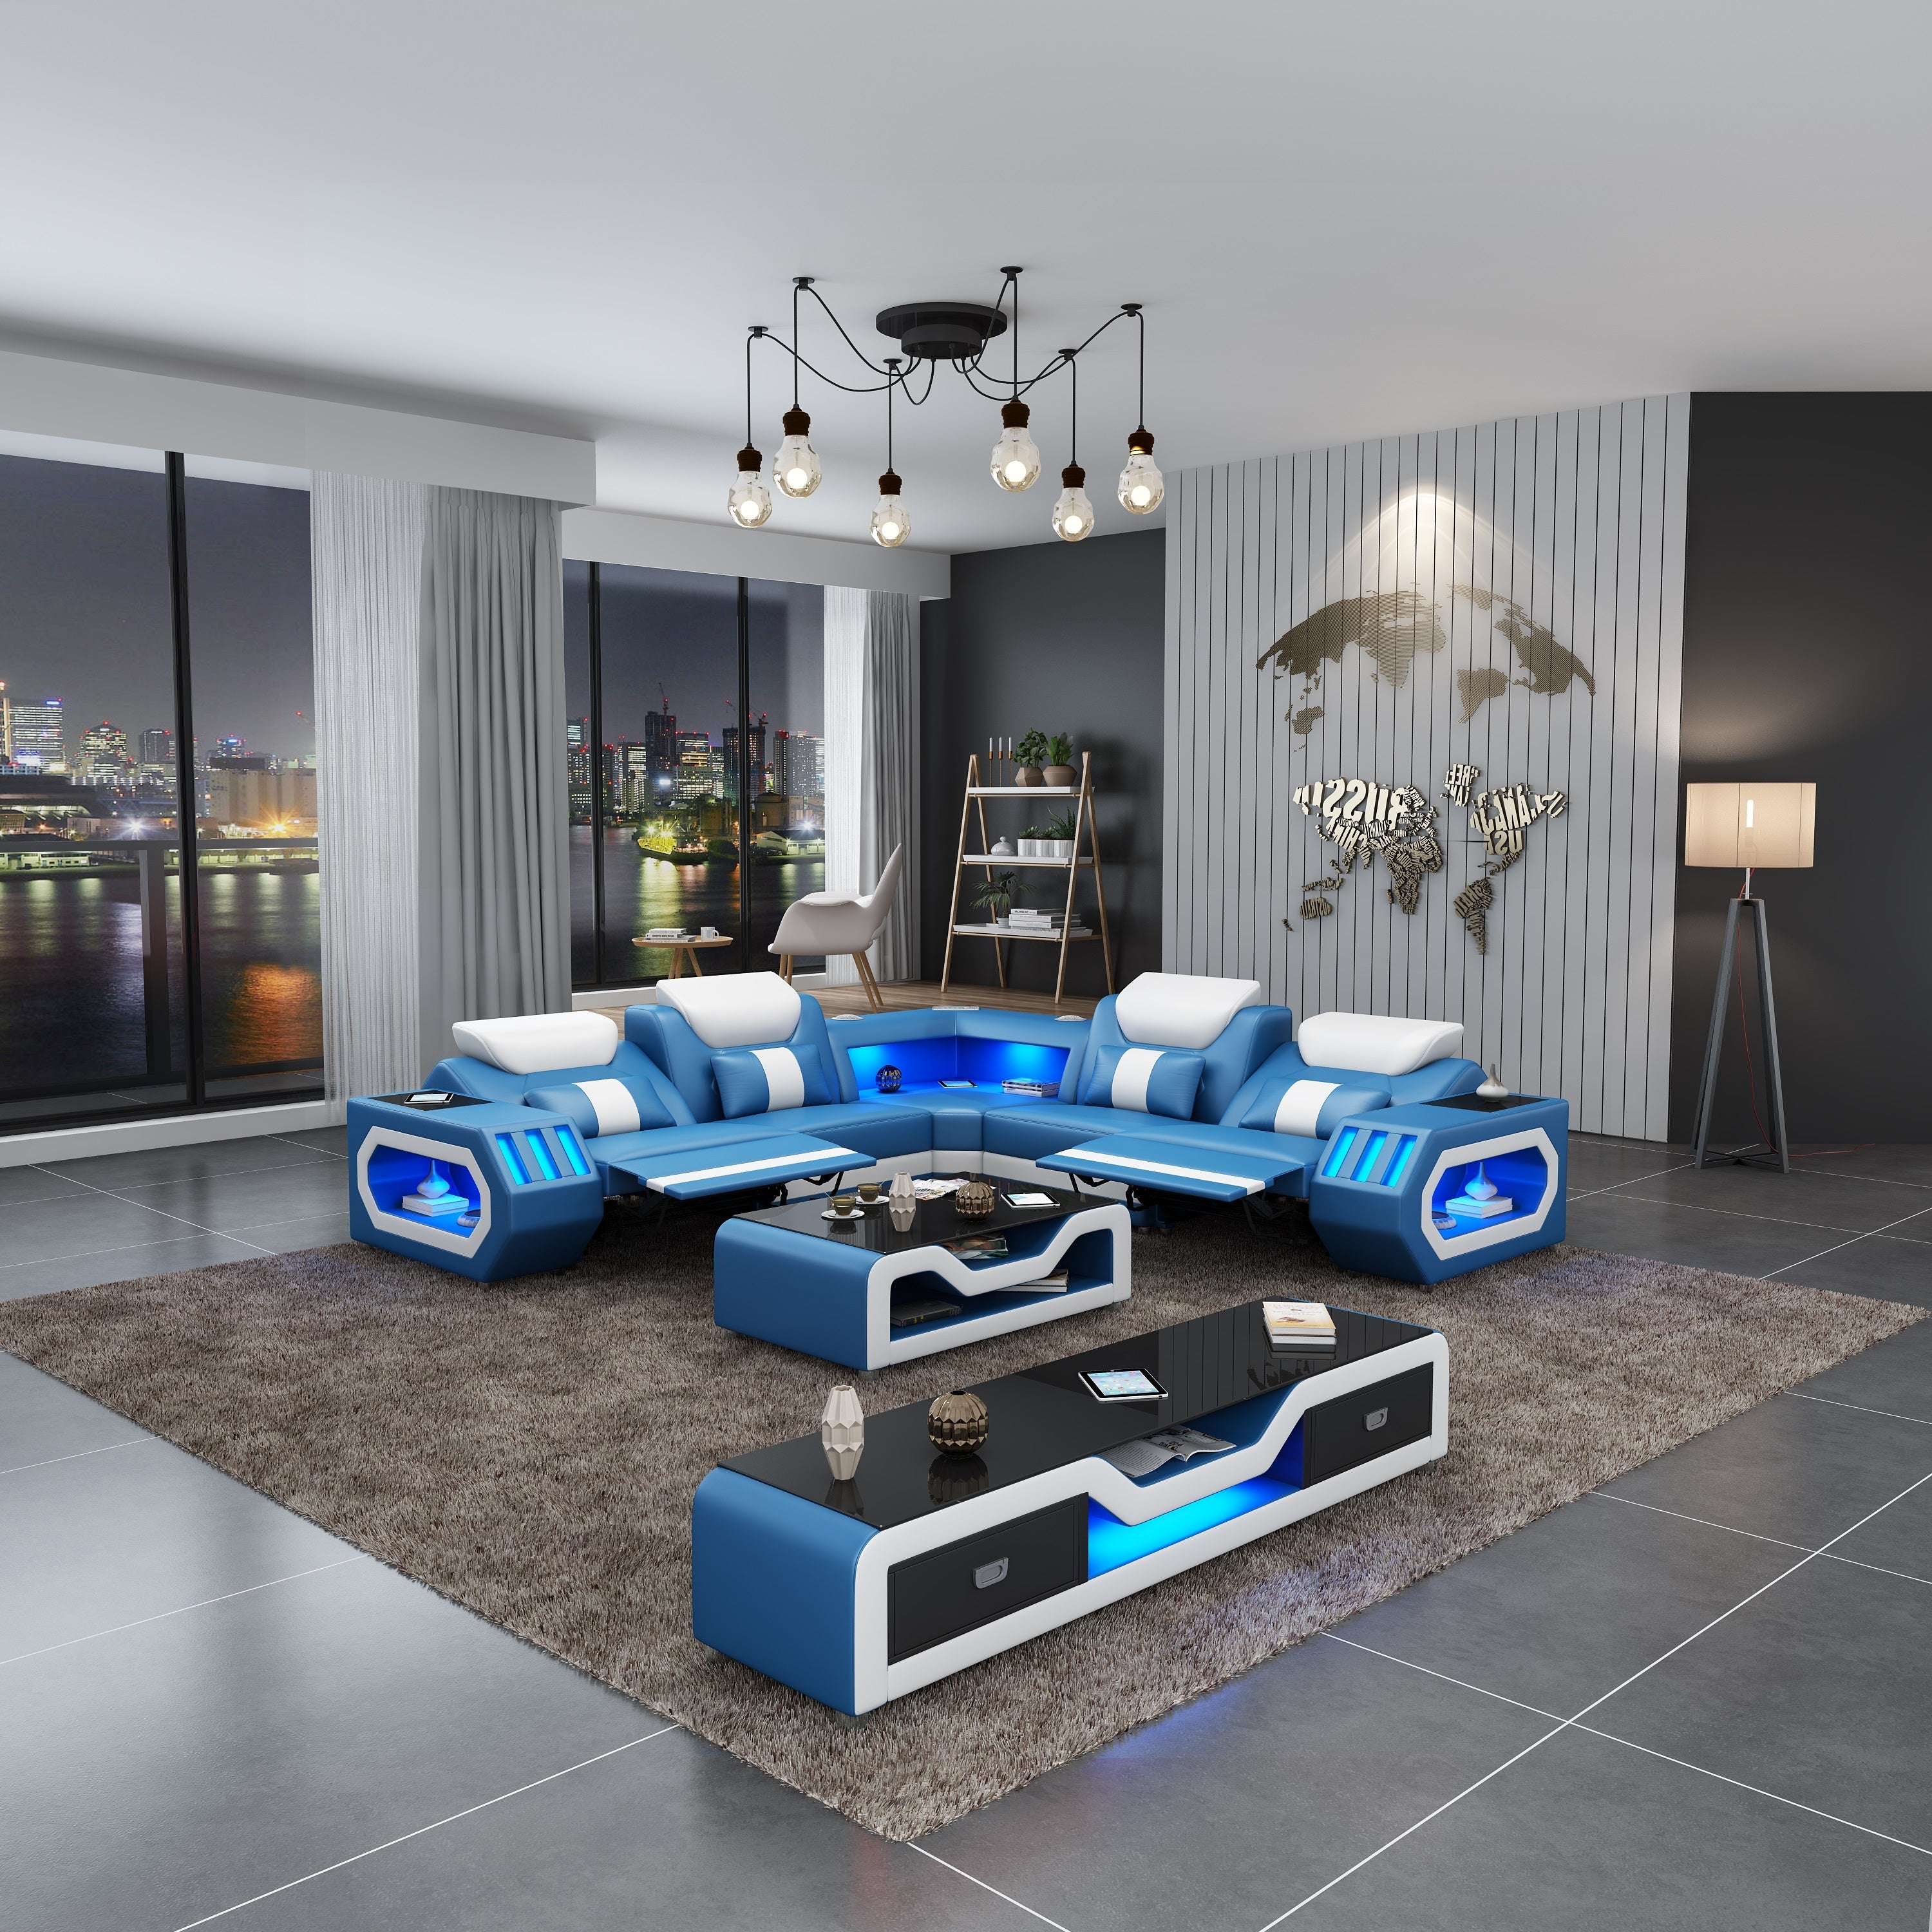 European Furniture - Spaceship LED Sectional Dual Recliner Blue White Italian Leather - LED-86662-BLUW-DRR - New Star Living